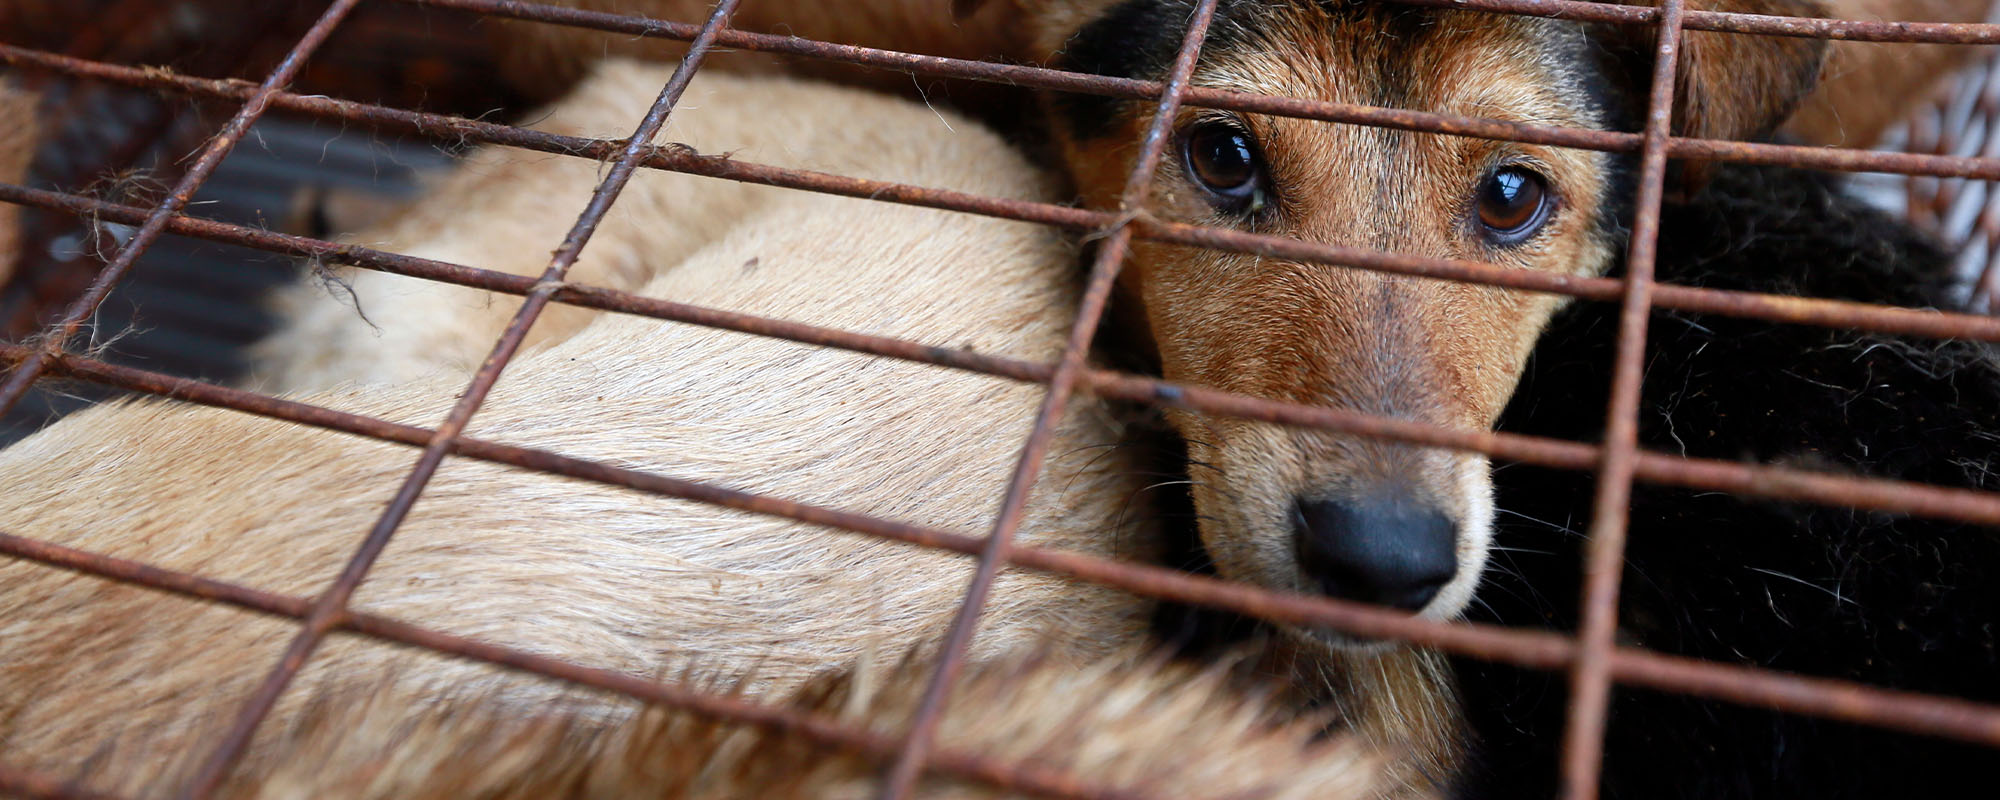 Dogs rescued from Yulin Dog Meat Festival